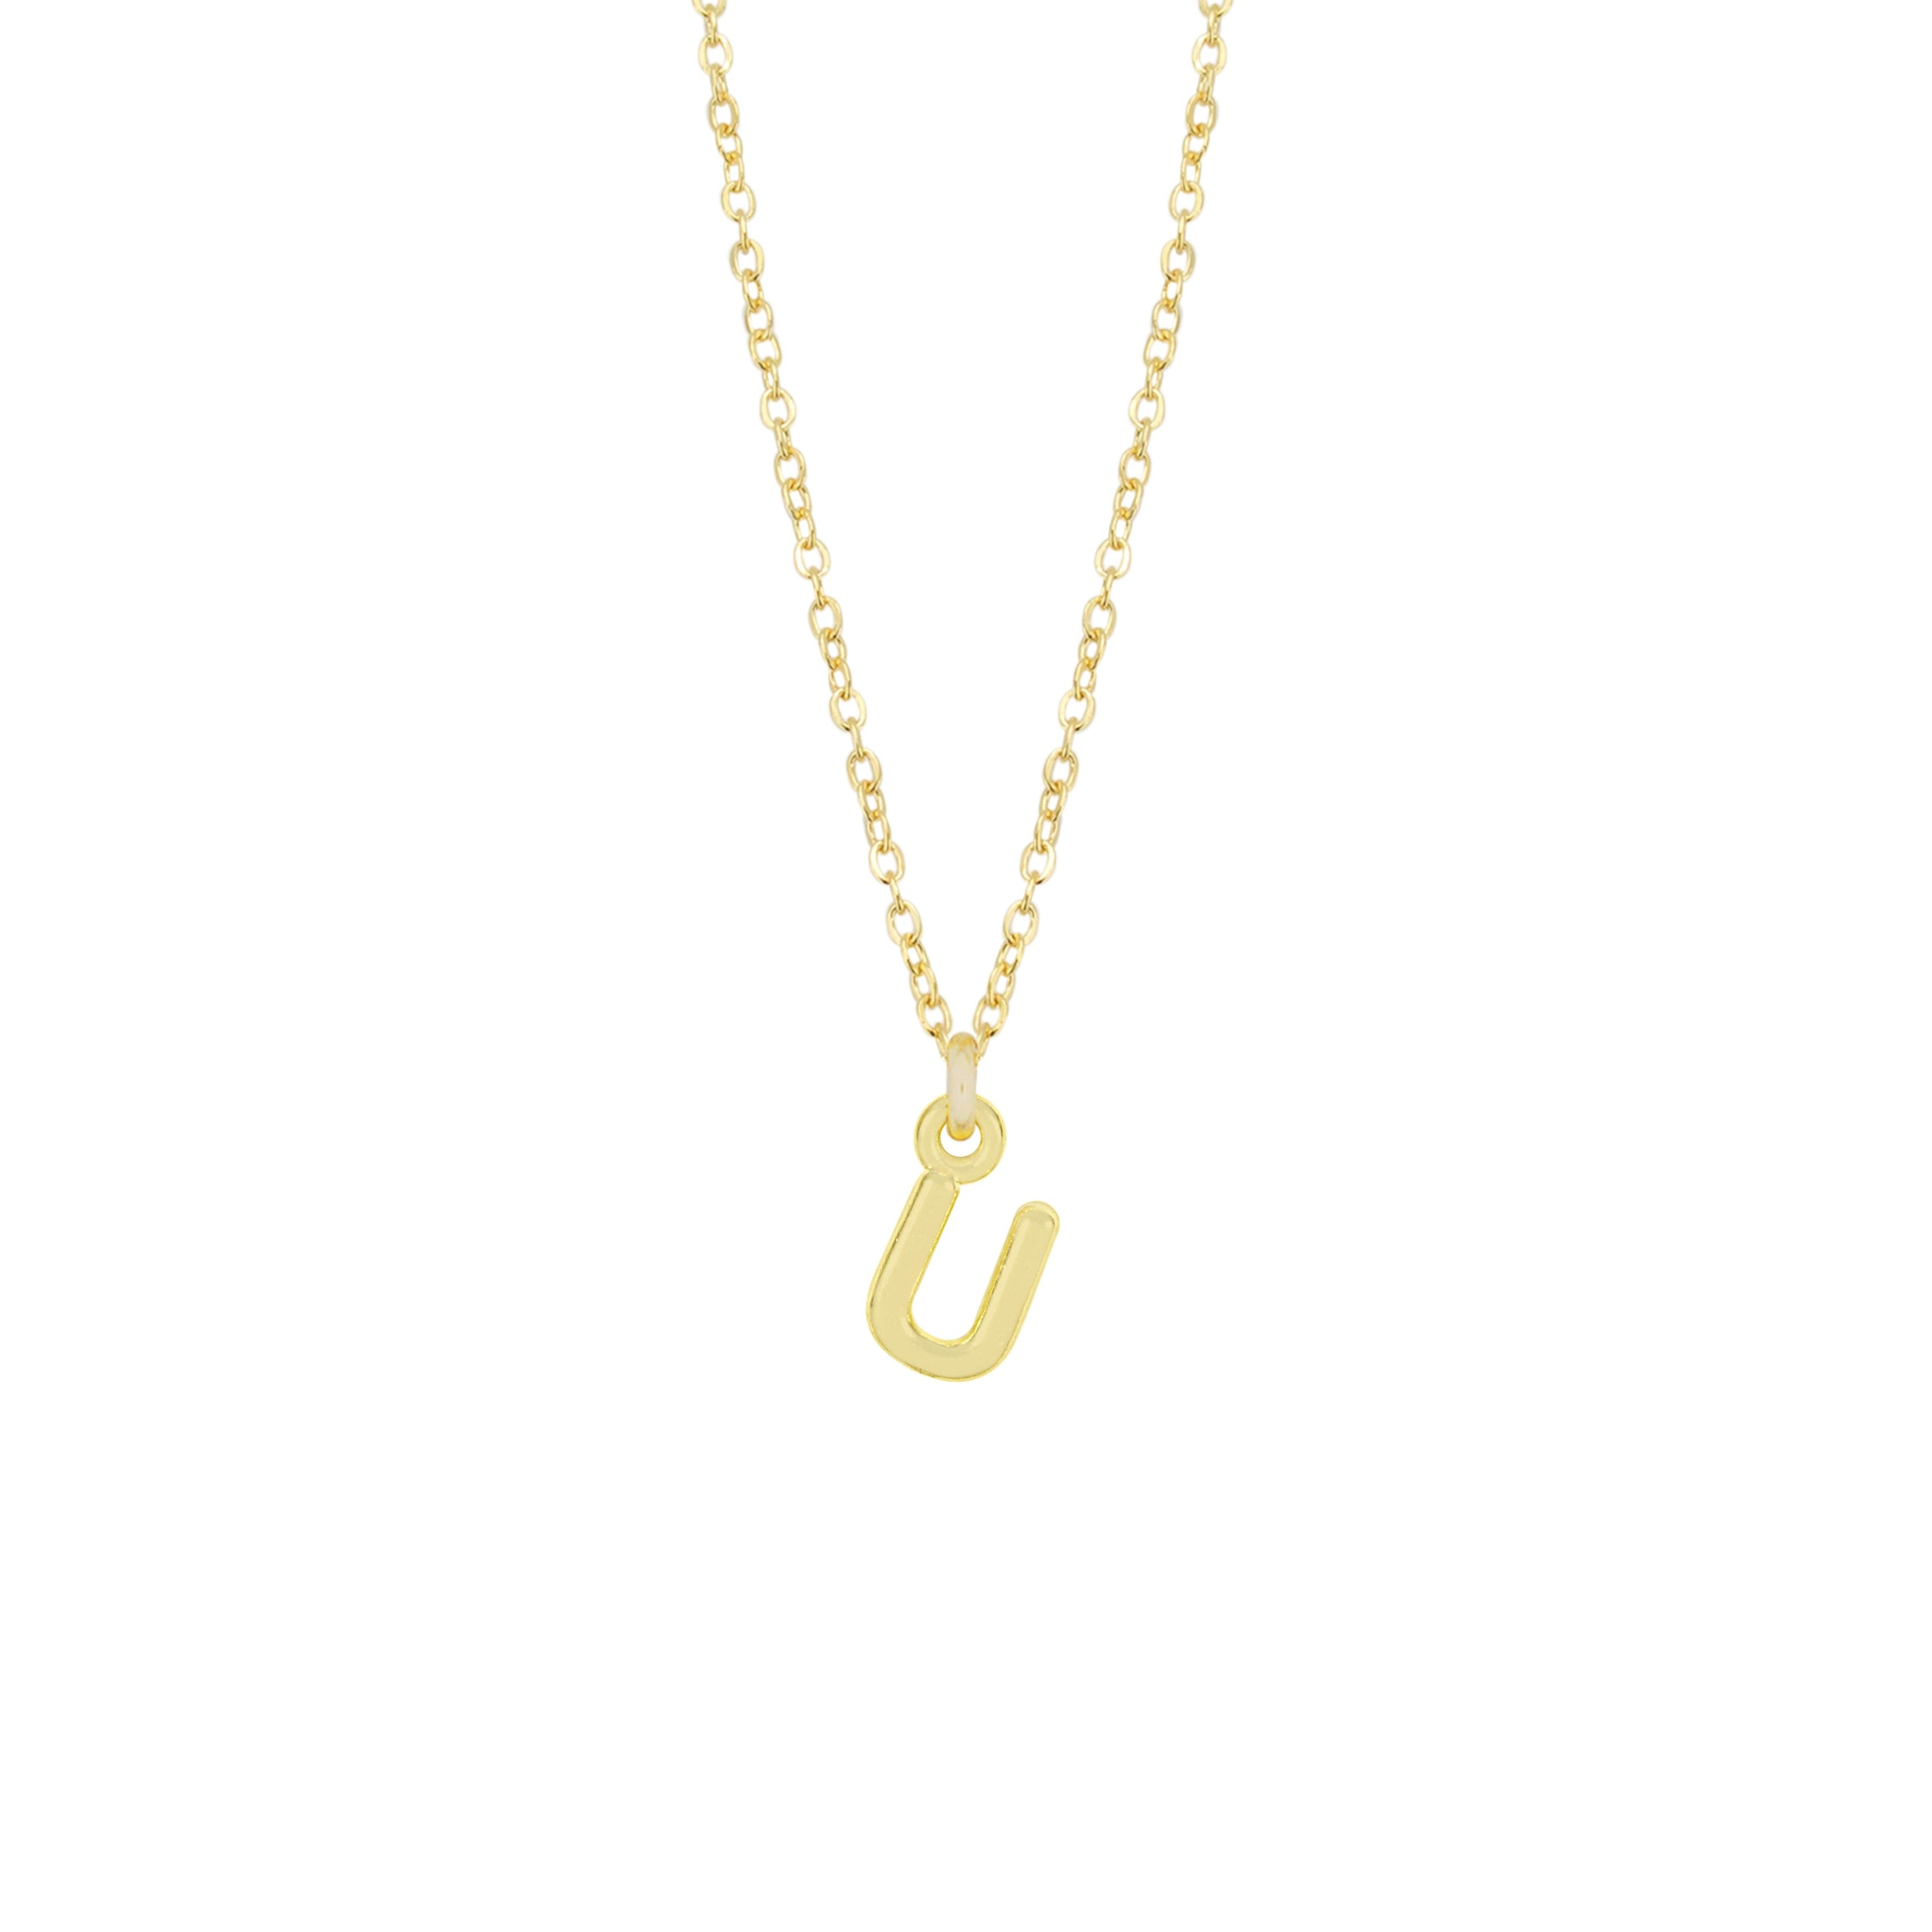 U Gold Initial Necklace by Katie Dean Jewelry, made in America, perfect for the dainty minimal jewelry lovers